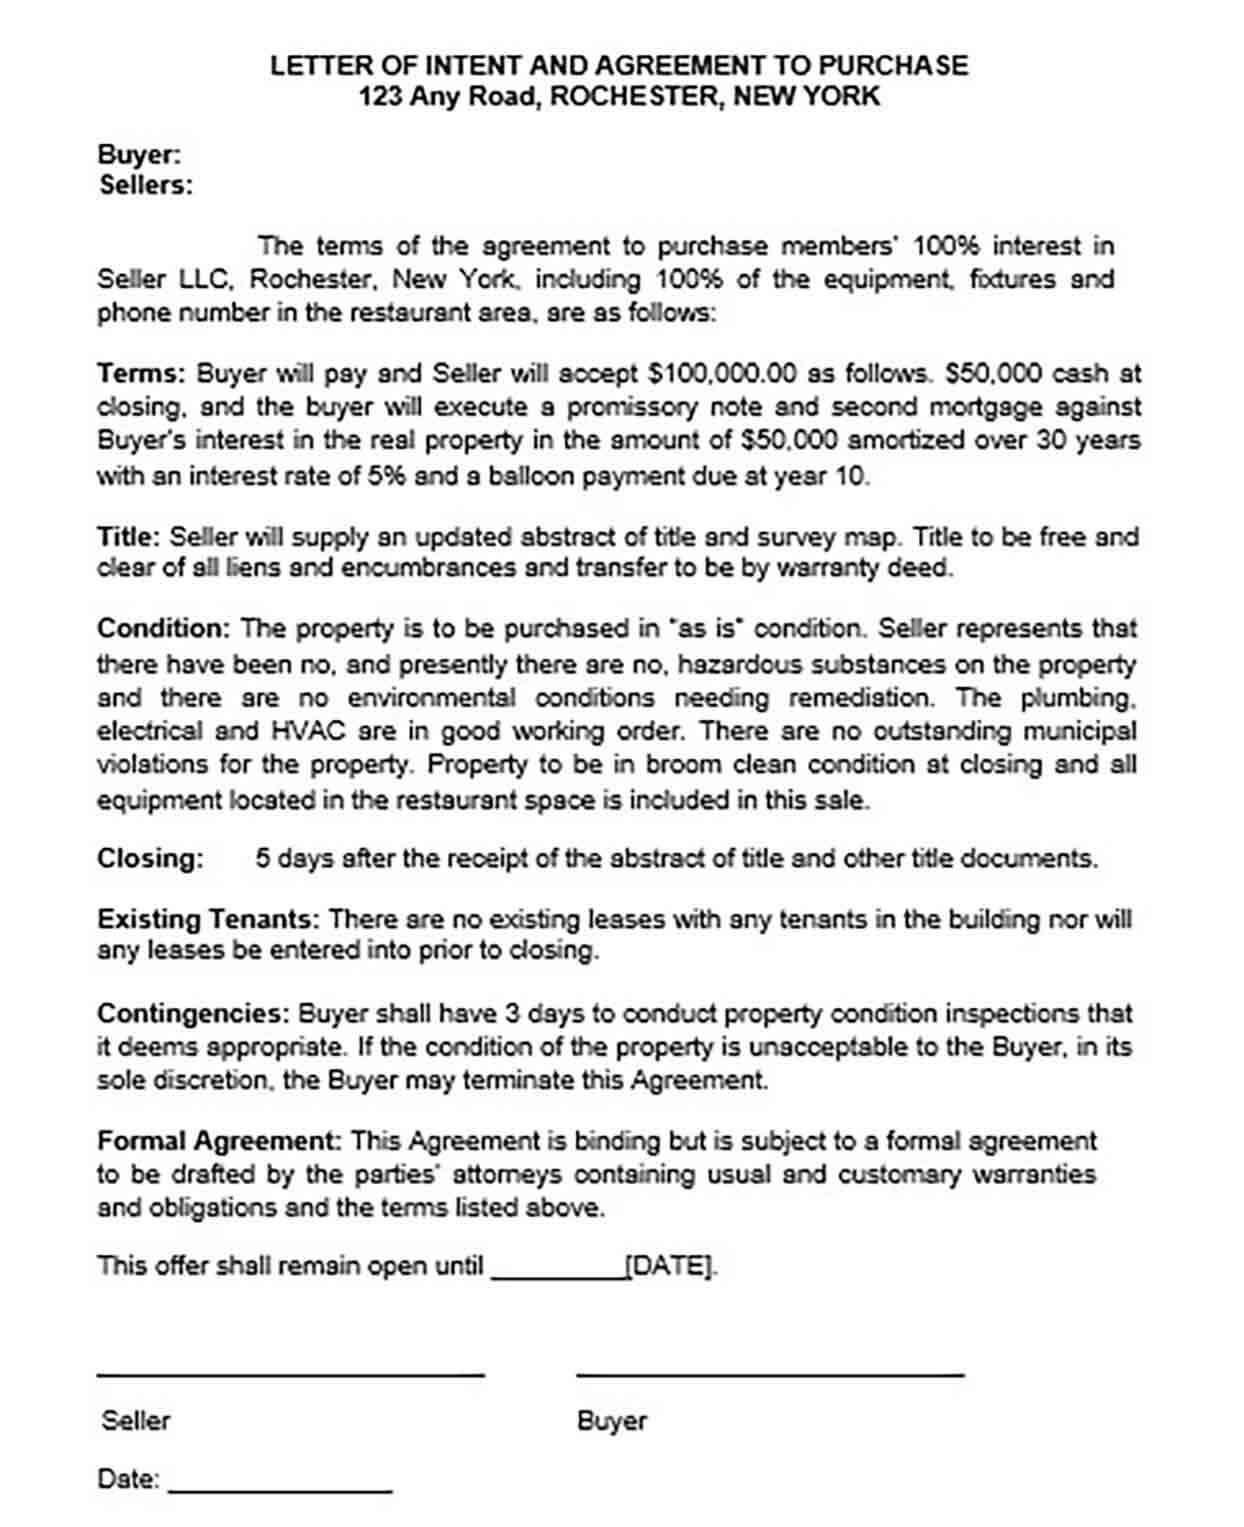 Letter of Intent to Purchase Equipment